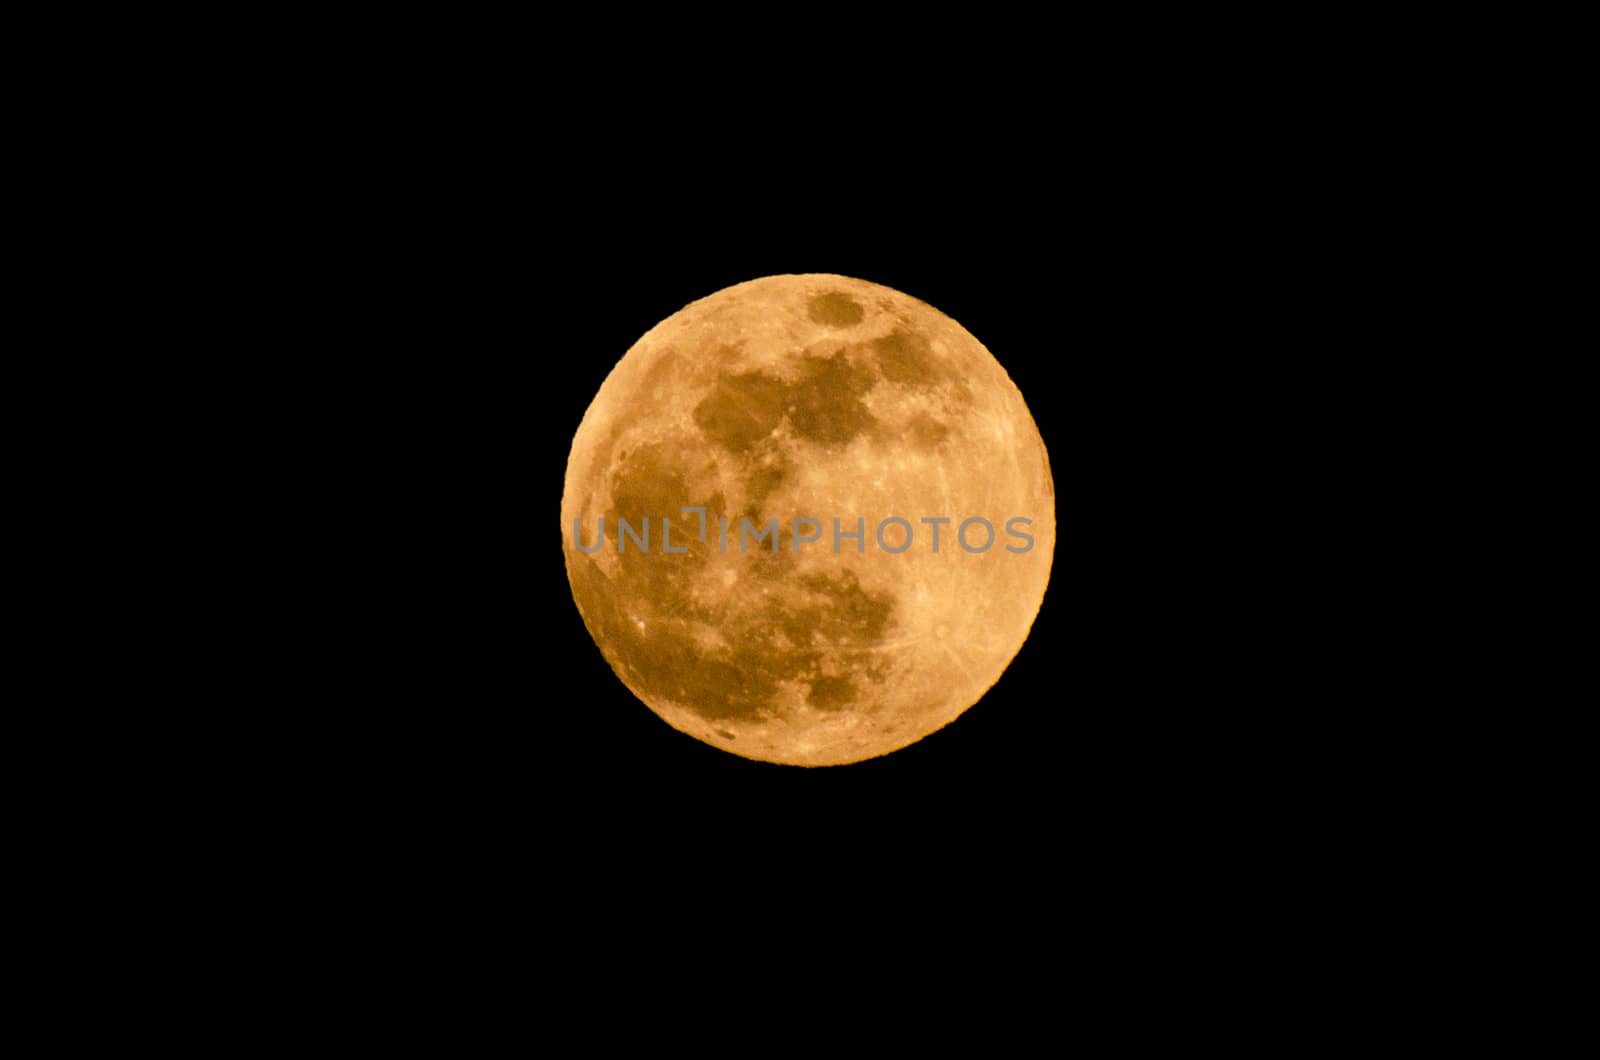 The yellow full moon on black background by sarayut_thaneerat